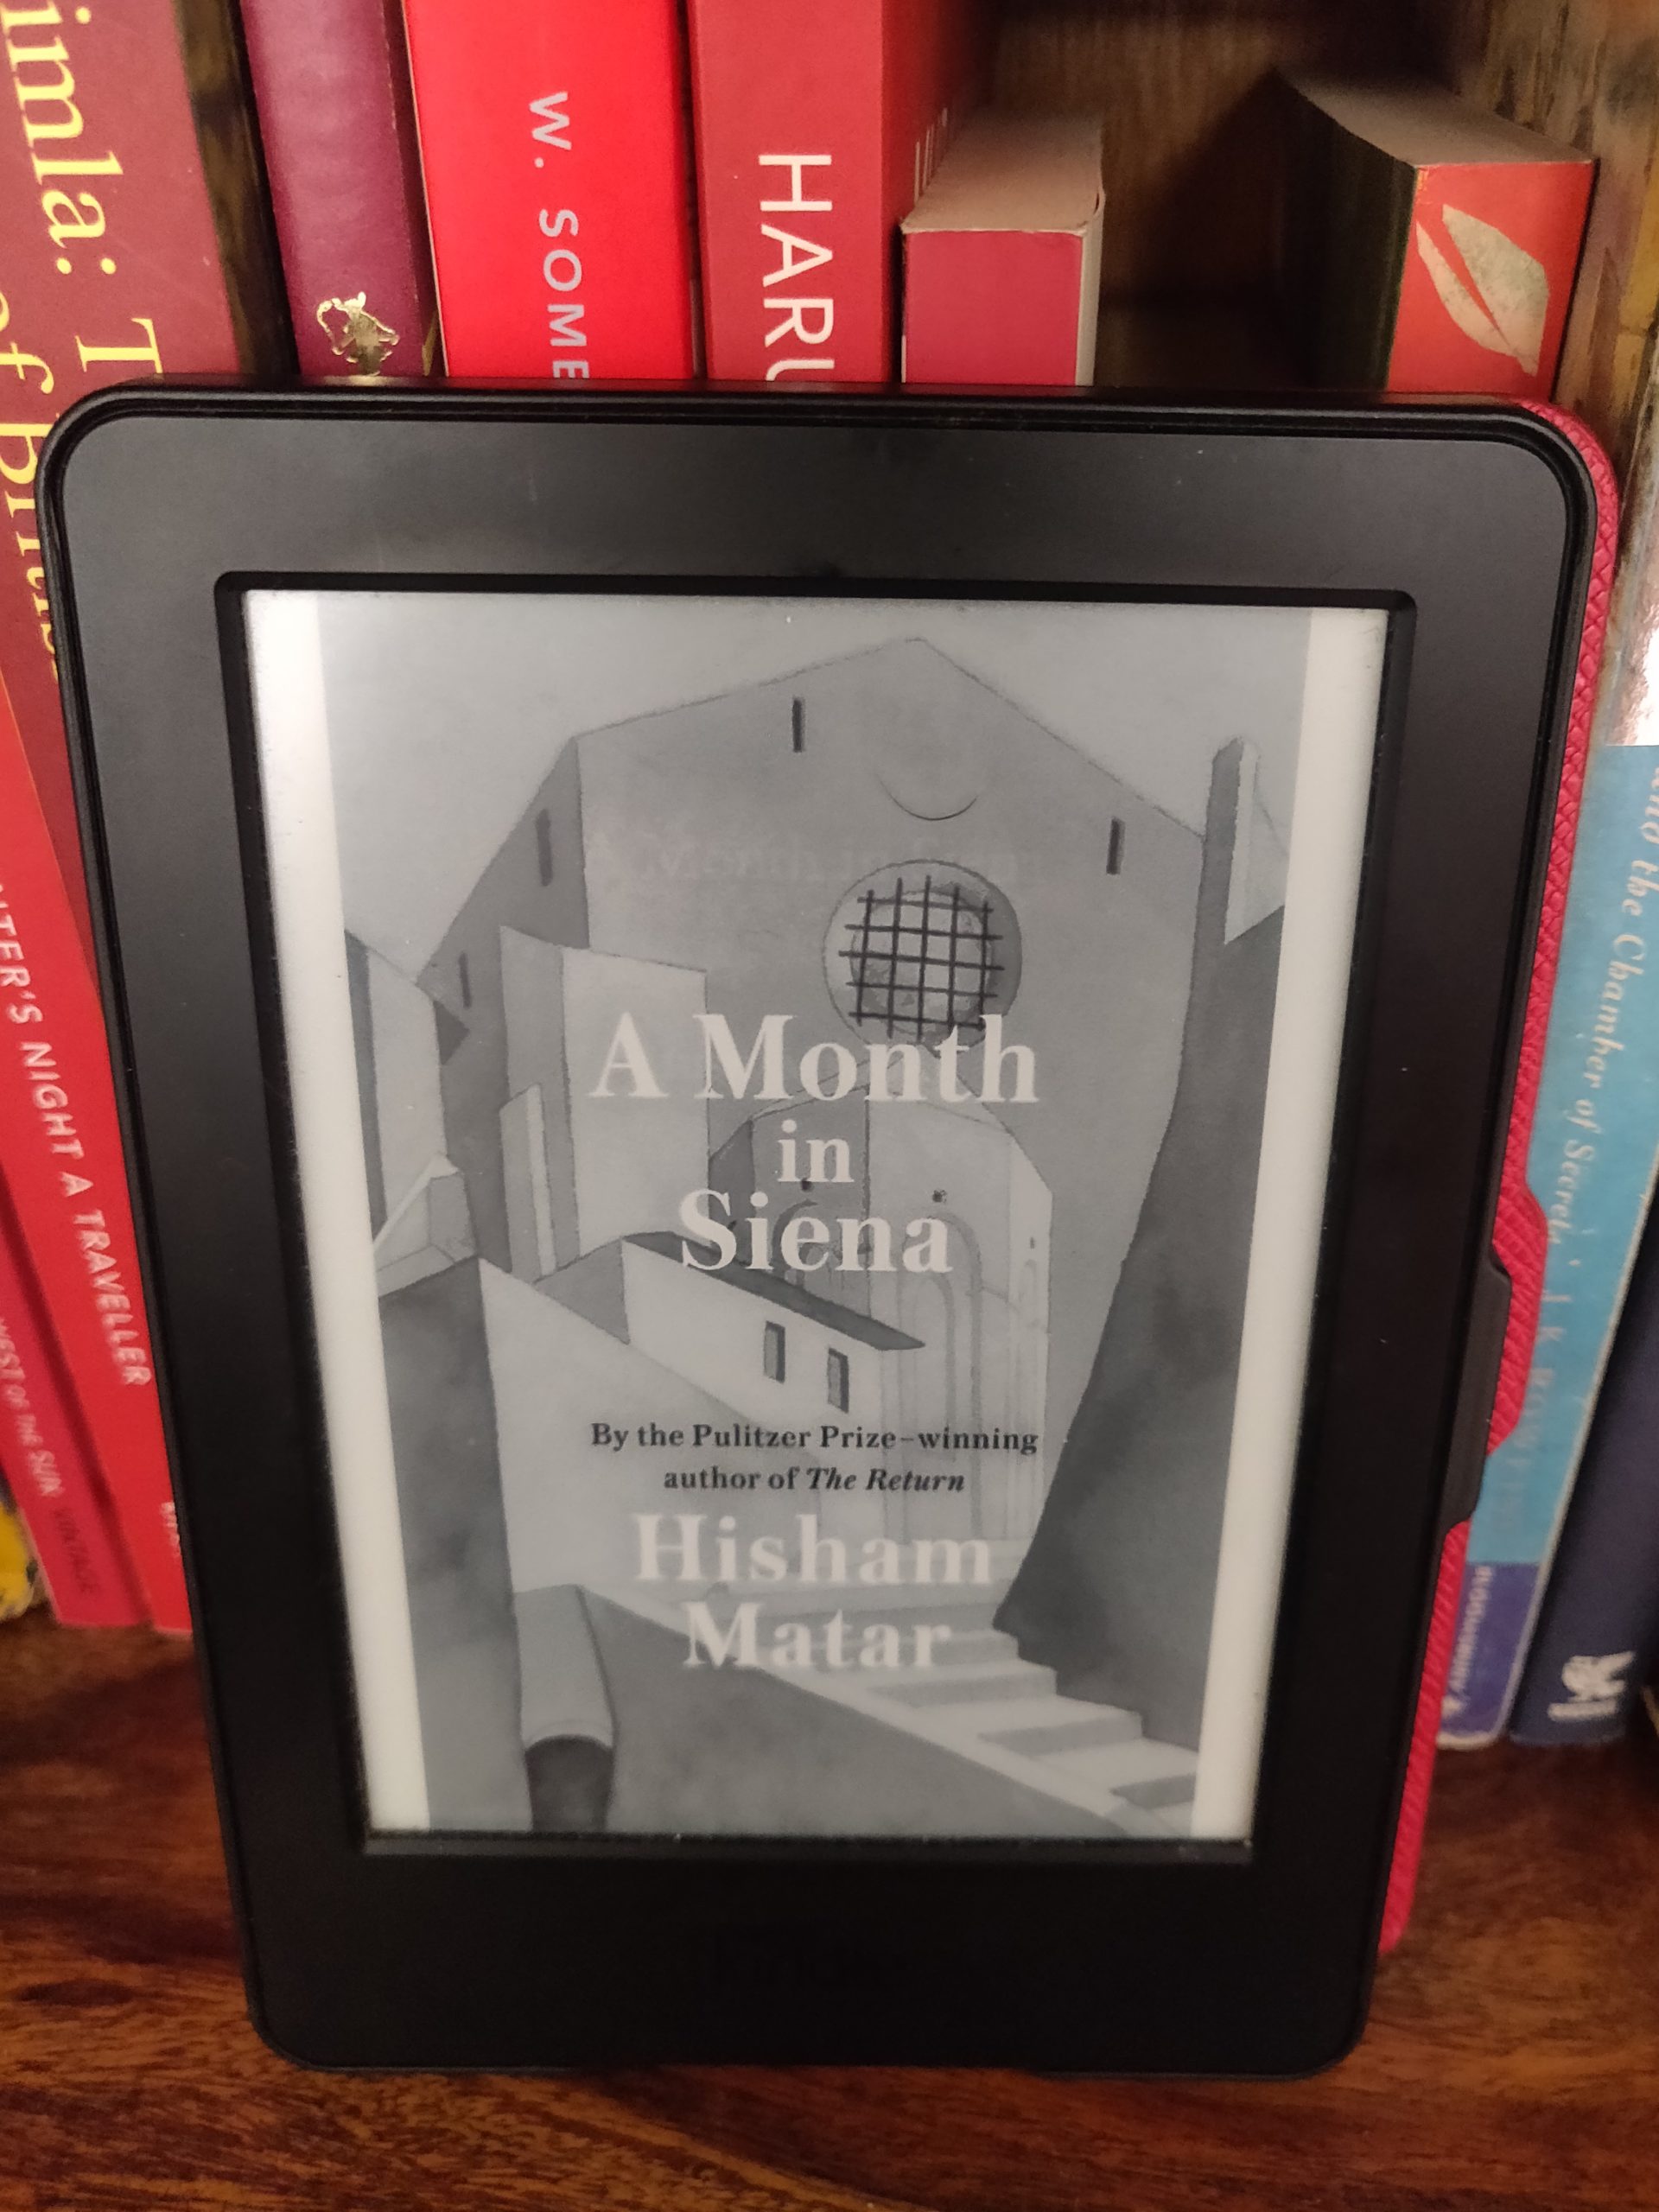 A Month in Siena by Hisham Matar is the author's story of fascination with Sienese art. 